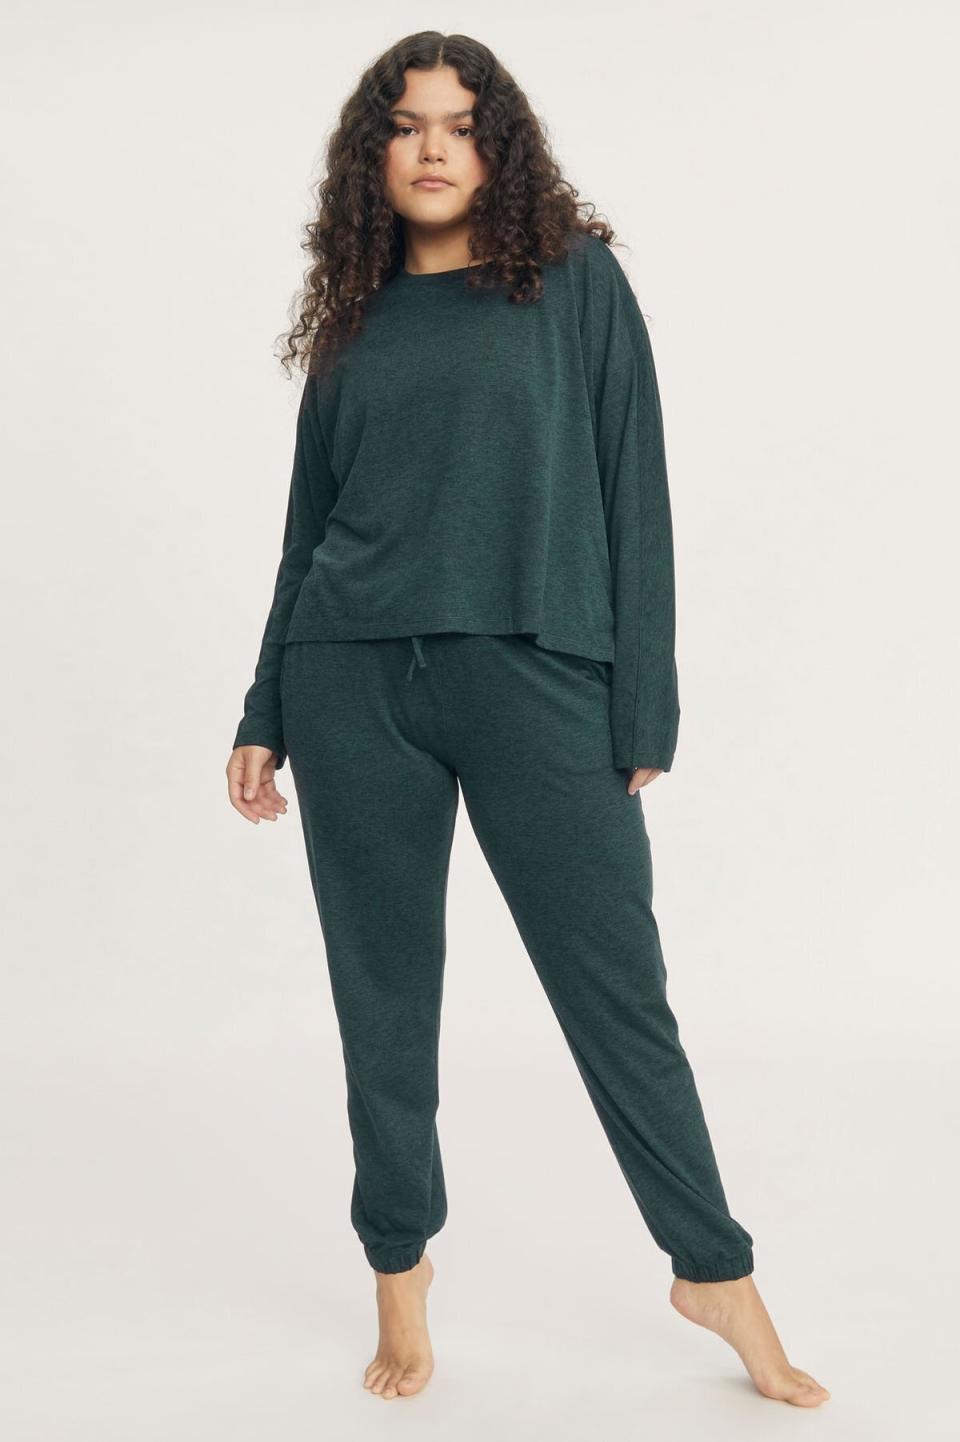 These joggers have pockets and were made from recycled polyester. <a href="https://fave.co/3niFtWi" target="_blank" rel="noopener noreferrer">Originally $68, get them now for 30% off at Girlfriend Collective</a>.